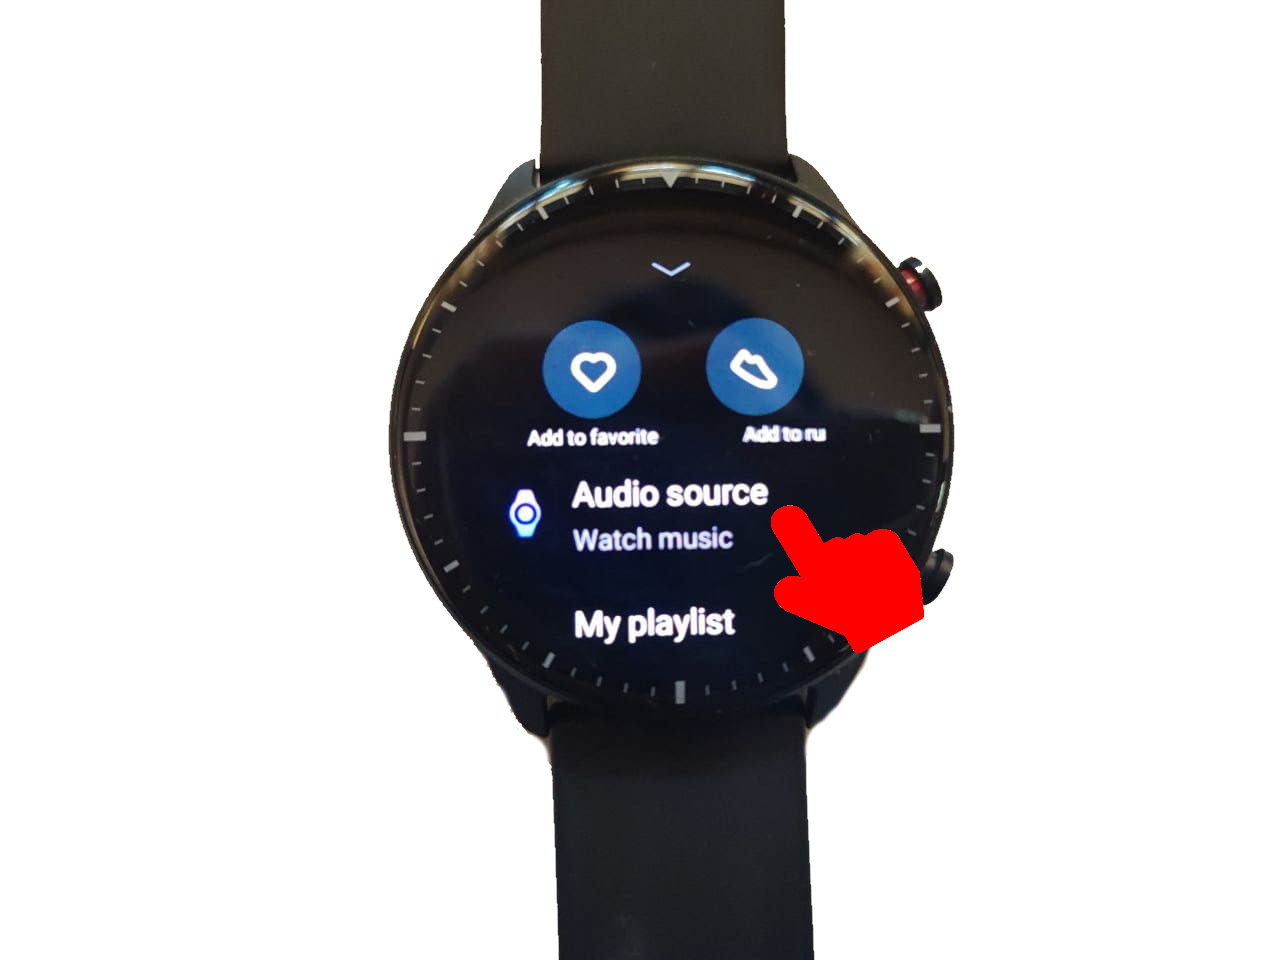 Tap Audio source option on watch